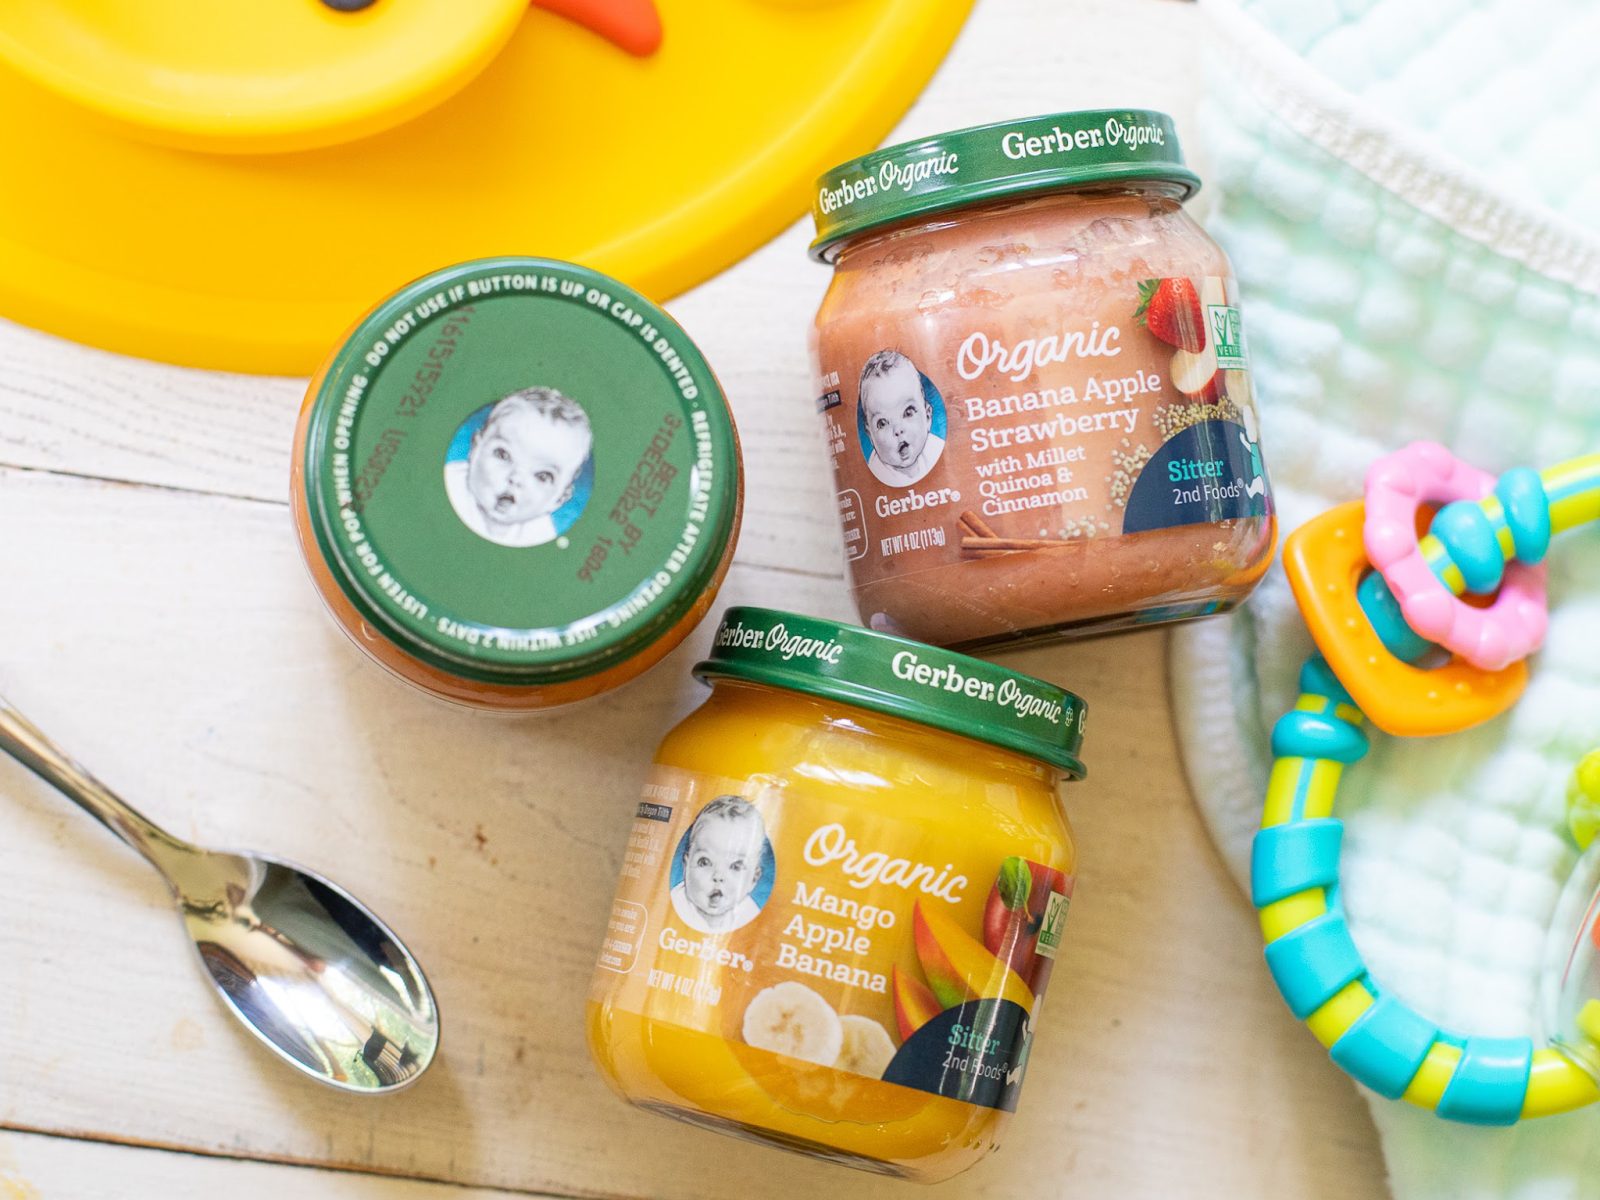 Gerber Organic Baby Food Jars Just $1.07 At Publix – Plus $1.29 Pouches